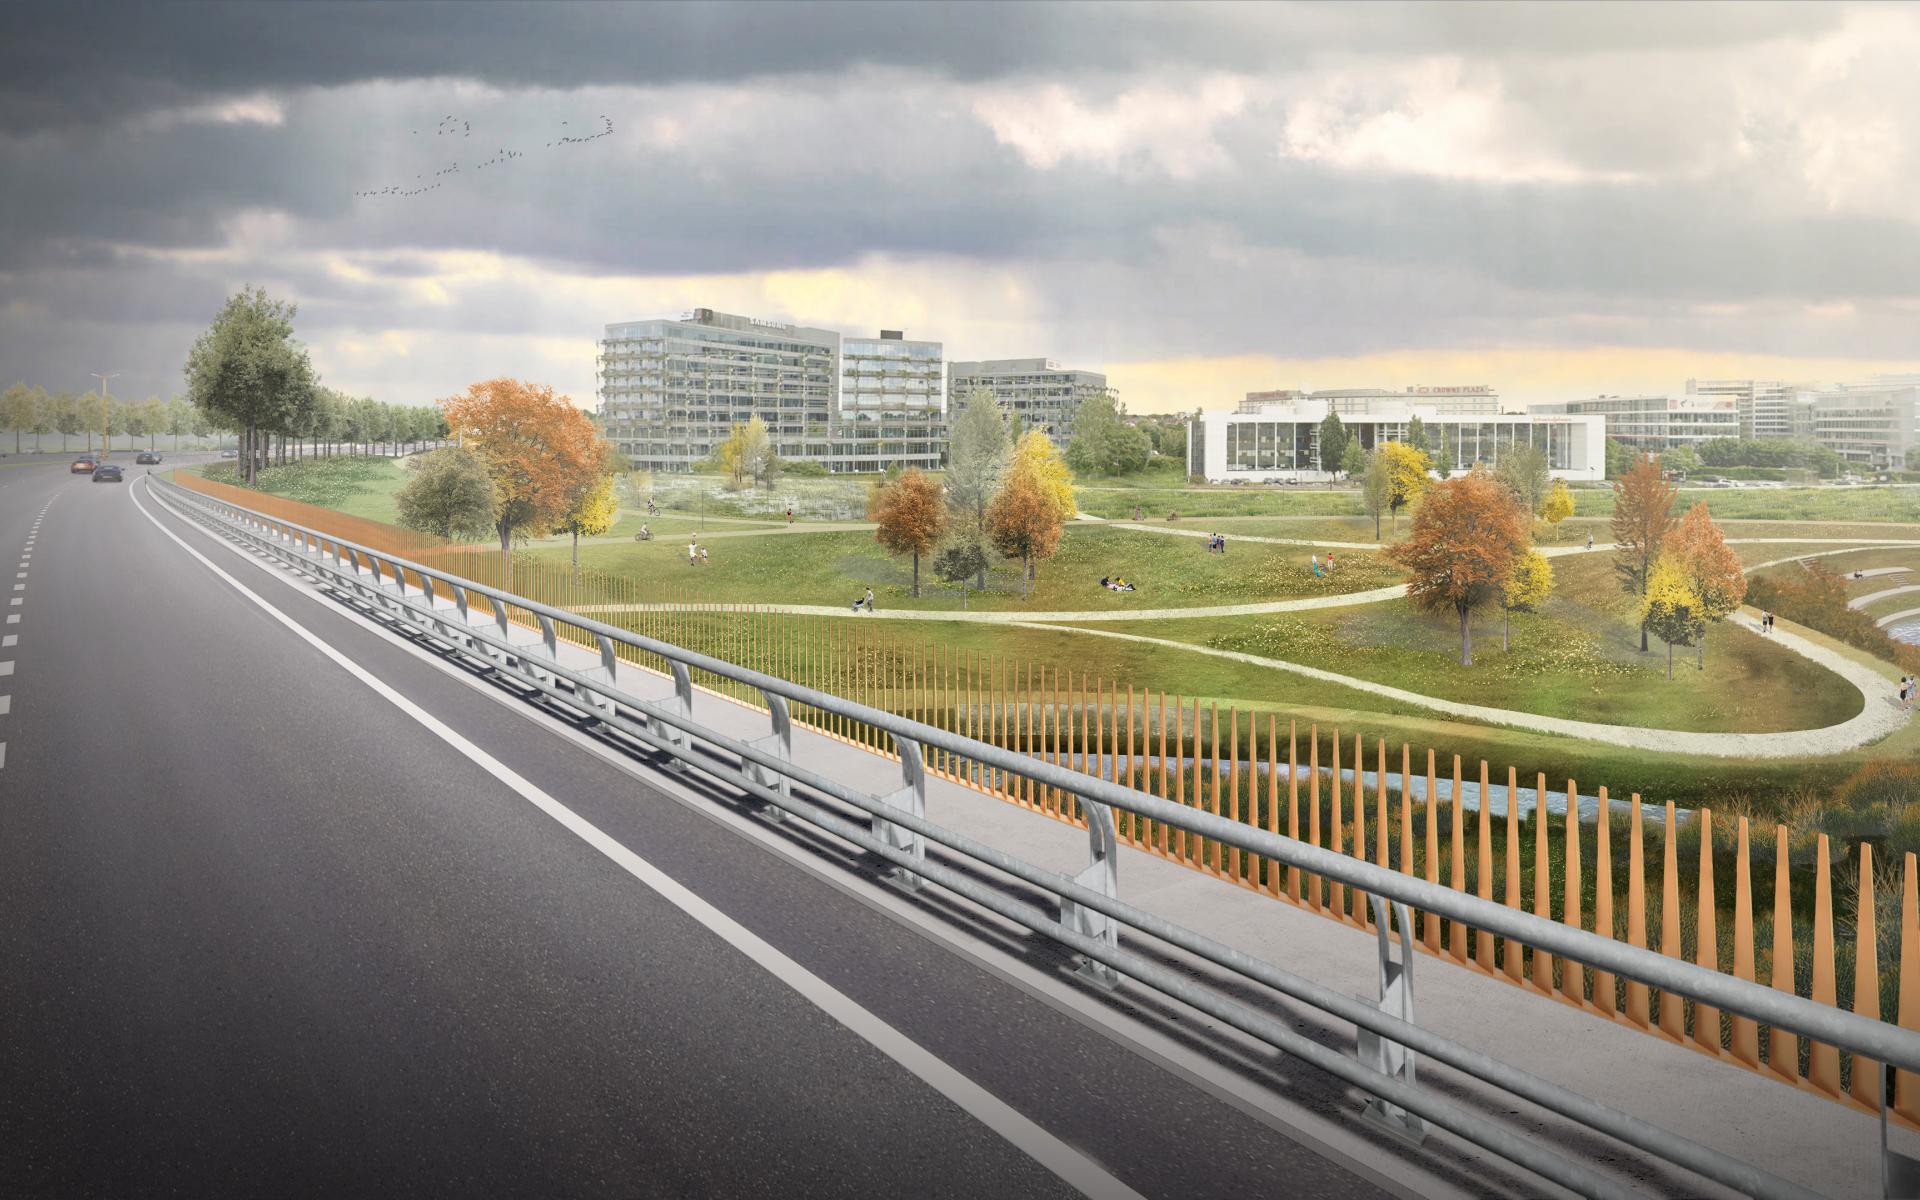 The Woluwe Valley will be restored to its former glory thanks to the refurbishment.